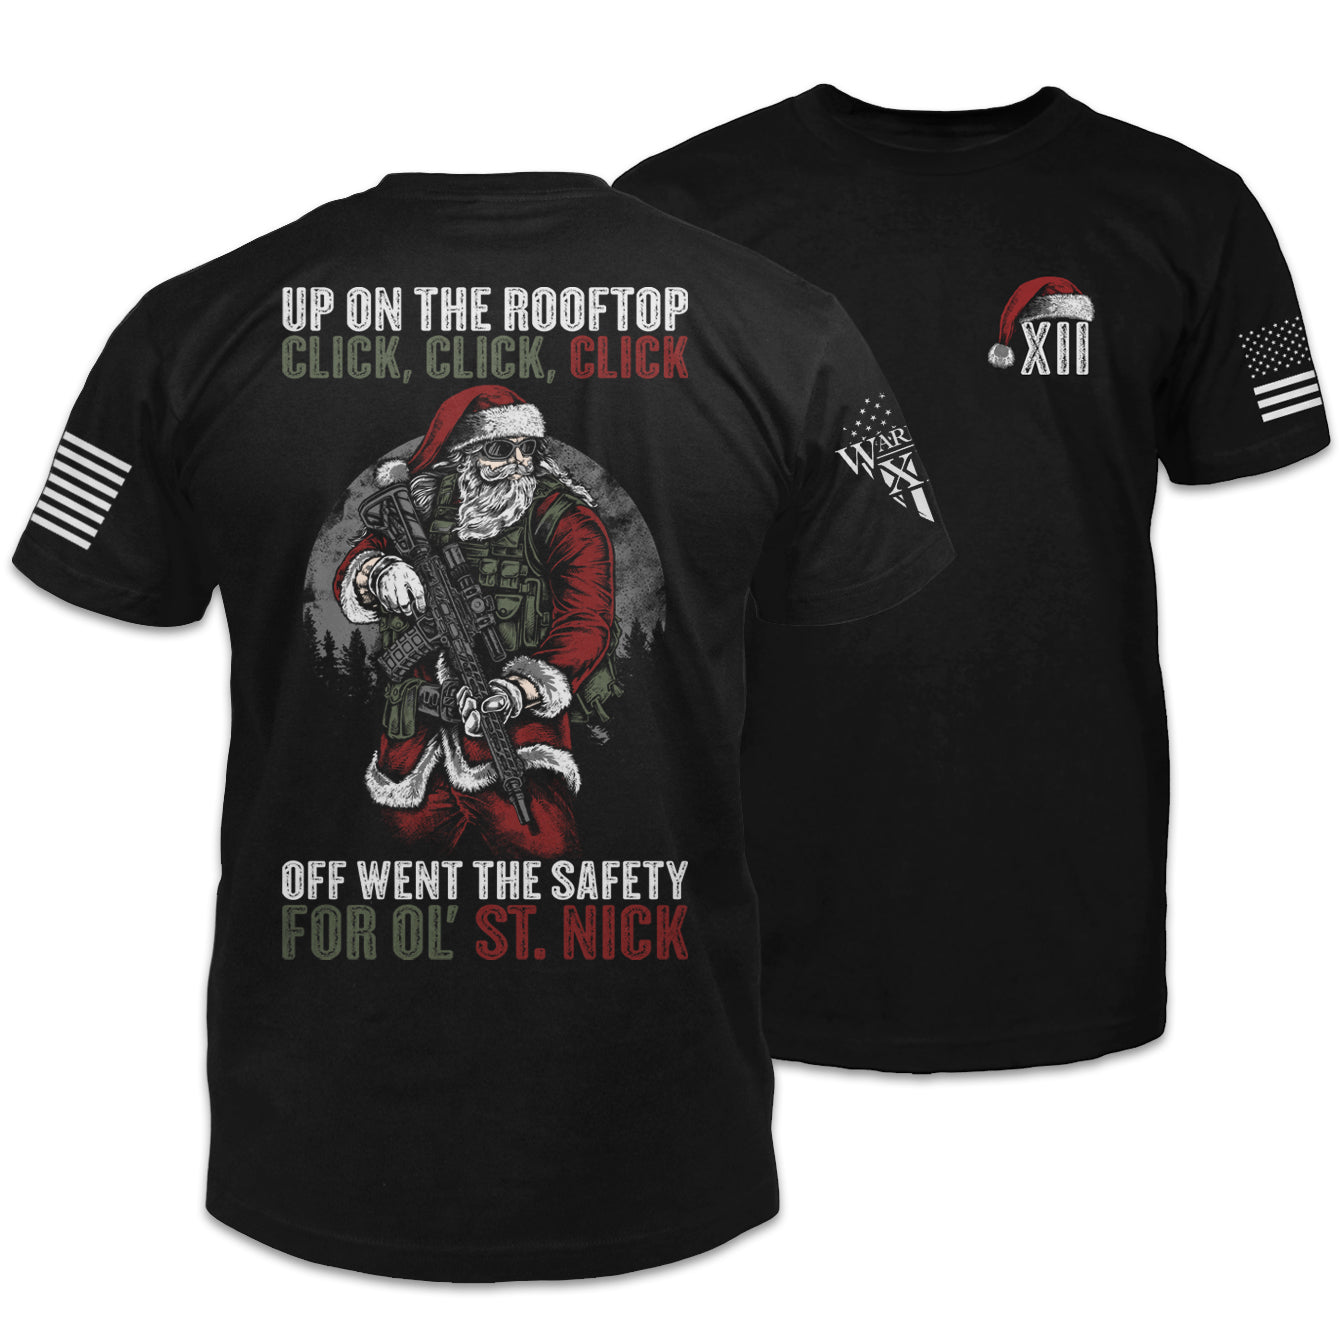 Front and back black t-shirt with the words "Up on the rooftop, click, click, click. Off went the safety for ol' St. Nick" with Santa holding a gun printed on the shirt.